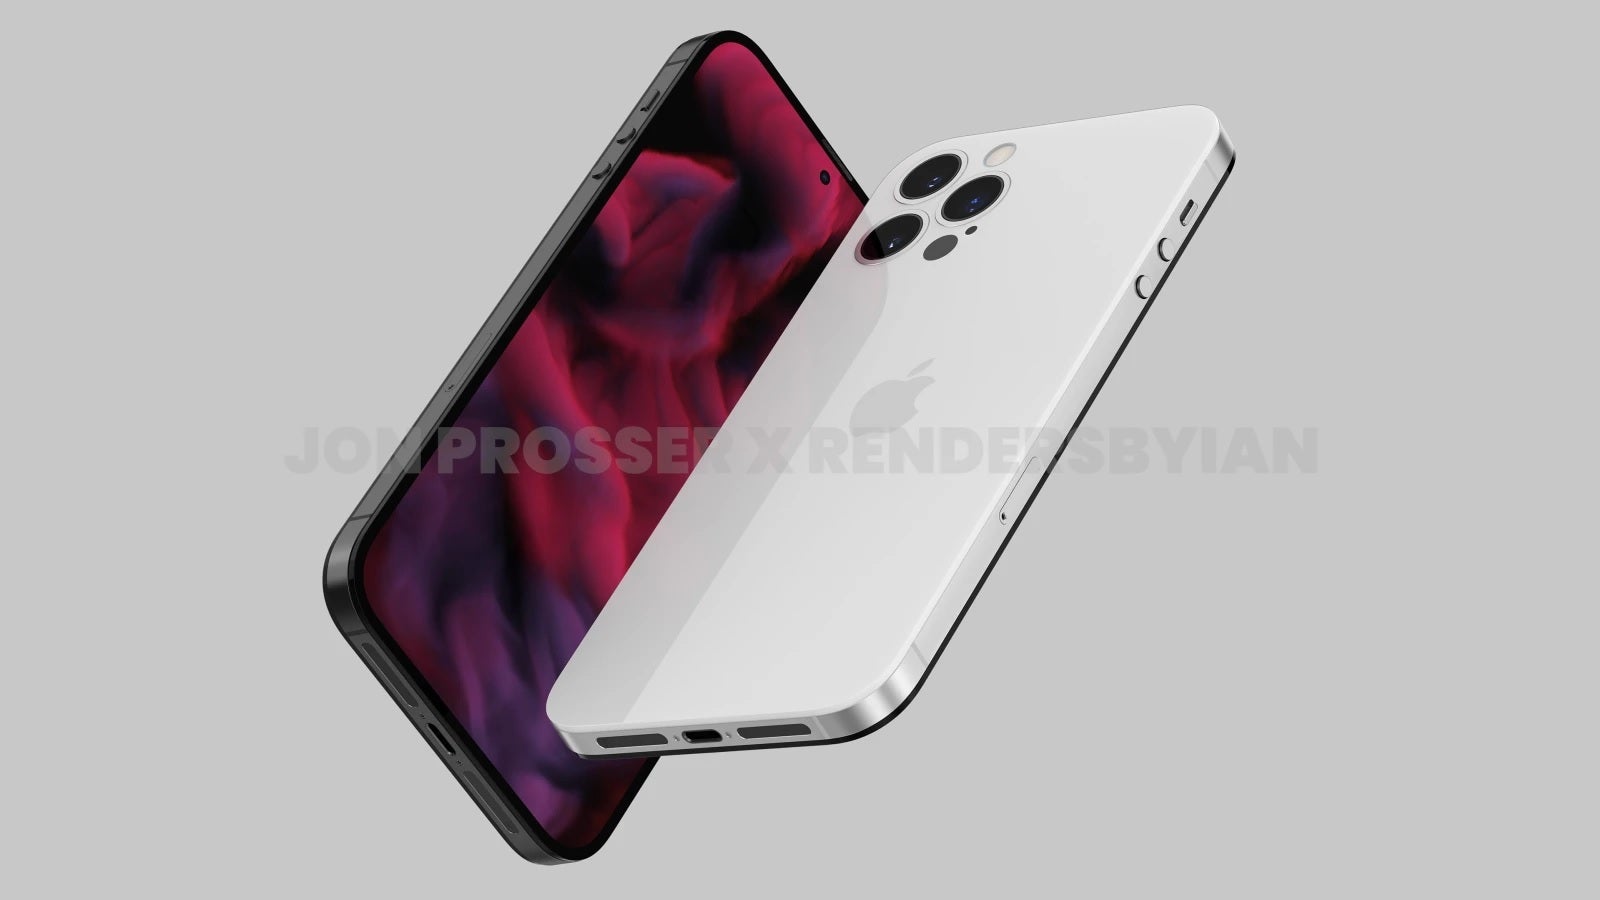 Render of the 2022 iPhone desi - no notch, flush mounted camera module - Gurman: flat-edge Apple Watch could surface eventually; sees new iPad Pro design, AirPods Pro in &#039;22